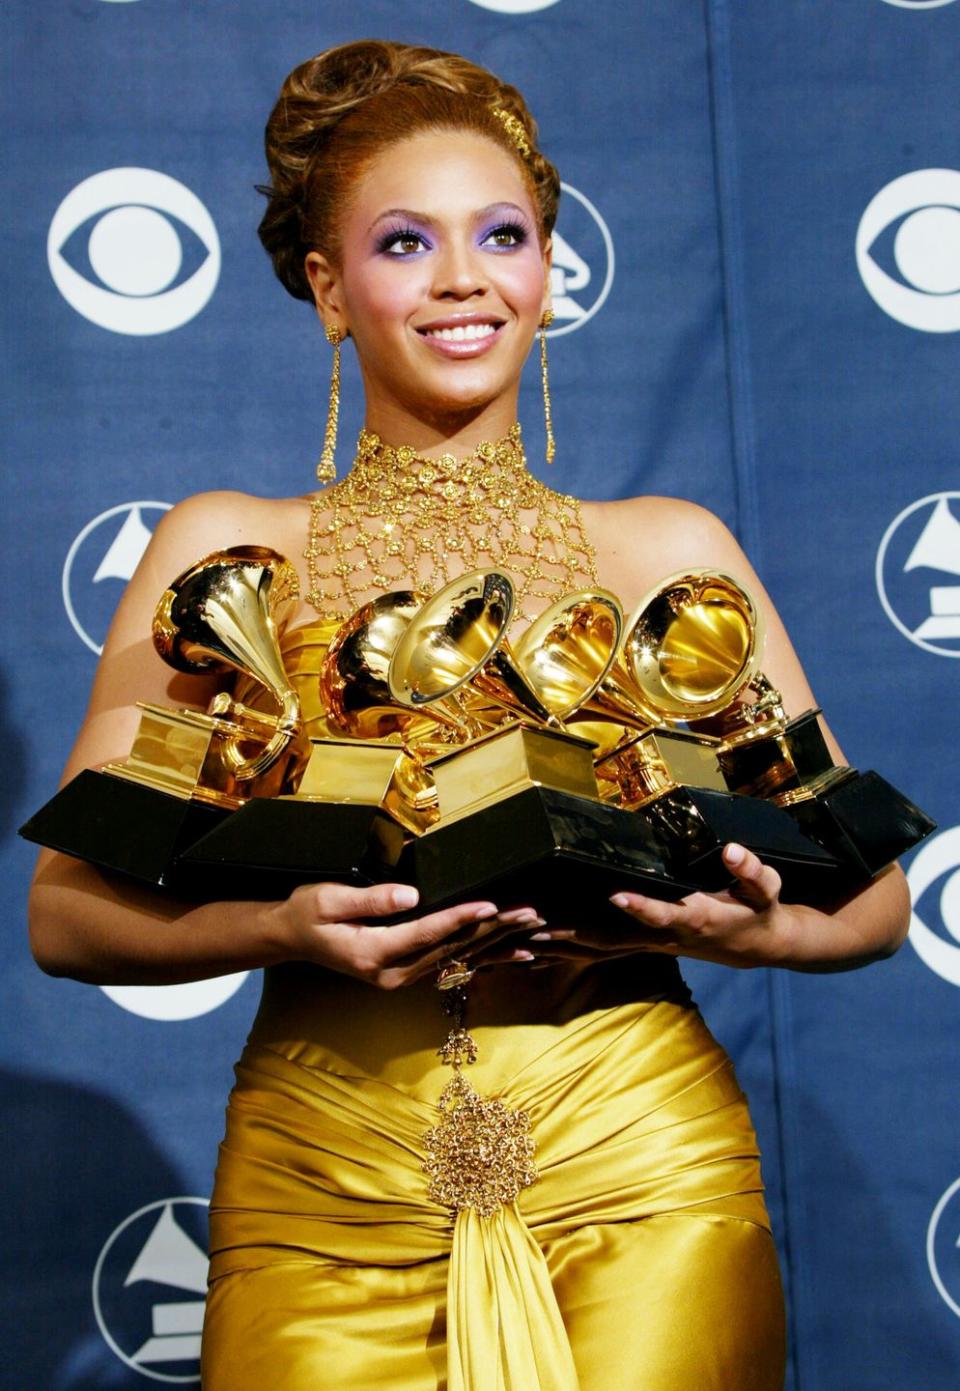 2004: Sweeping the Grammy Awards